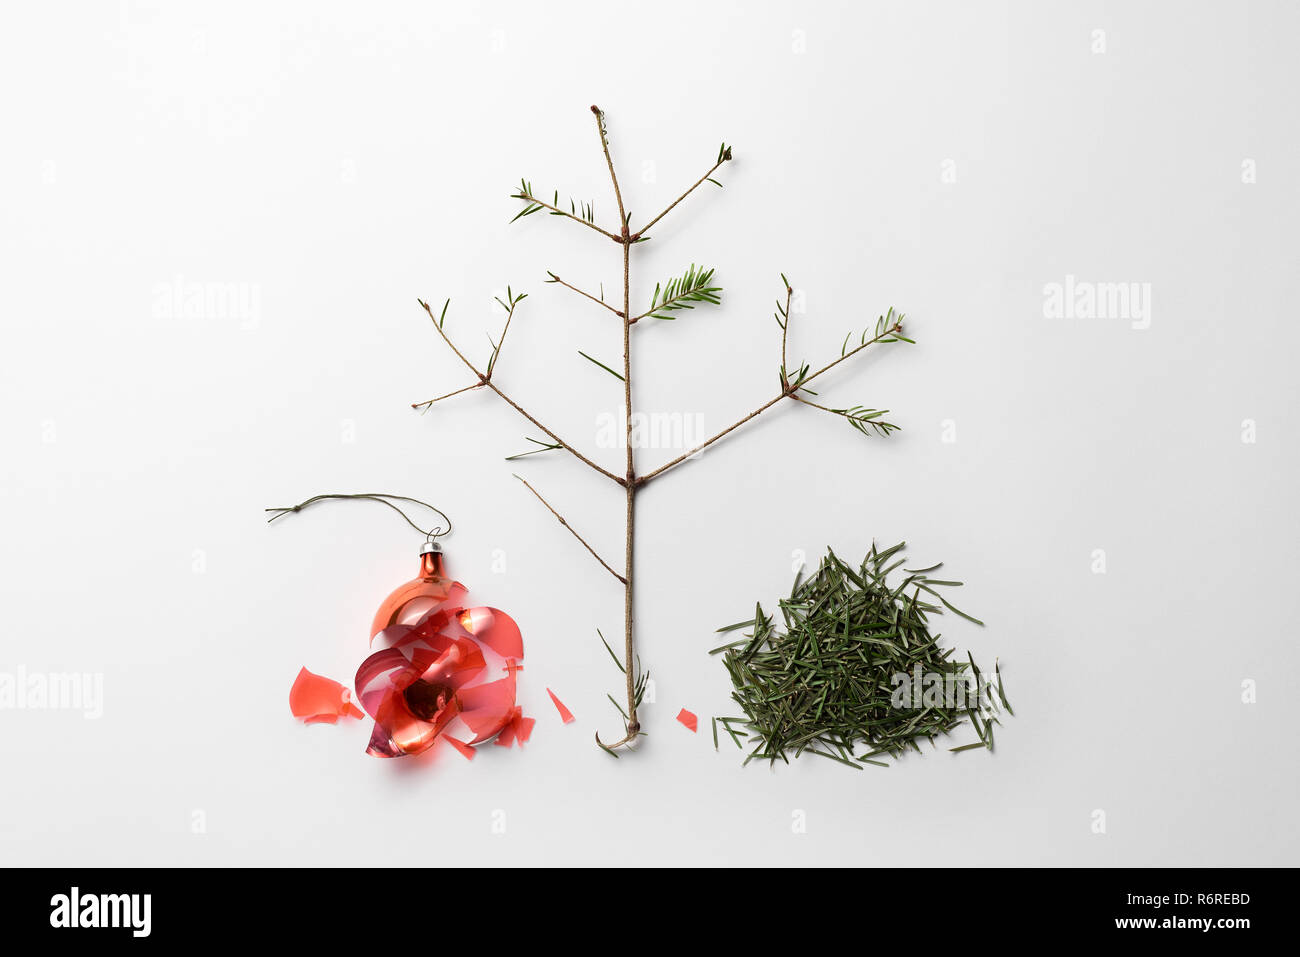 Christmas Break Is Over. Broken Christmas ball and fallen spruce needles on white background. Flat lay, top view Stock Photo